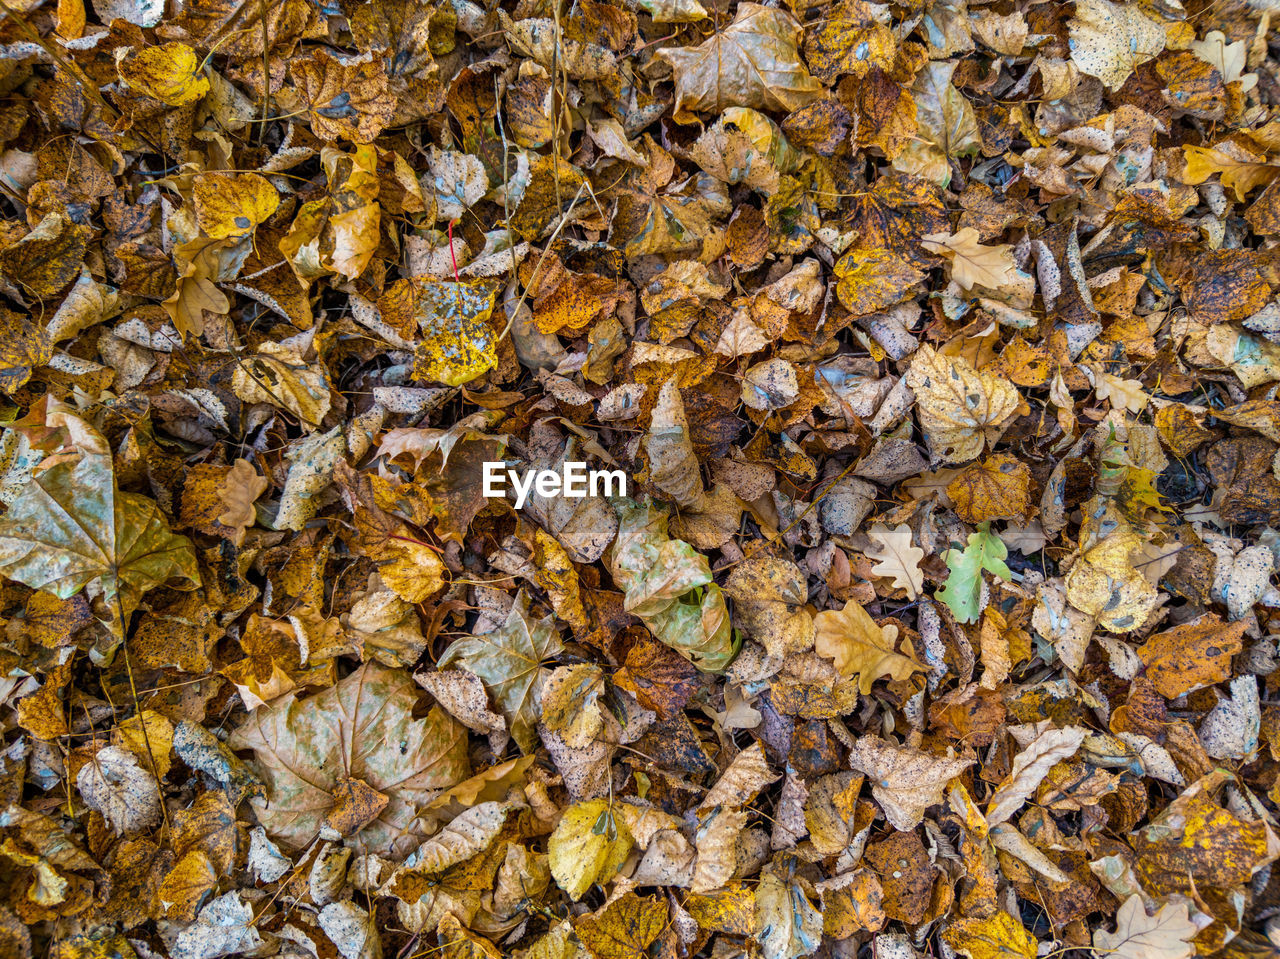 Autumn background of different types of fallen wooden leaves with selective focus